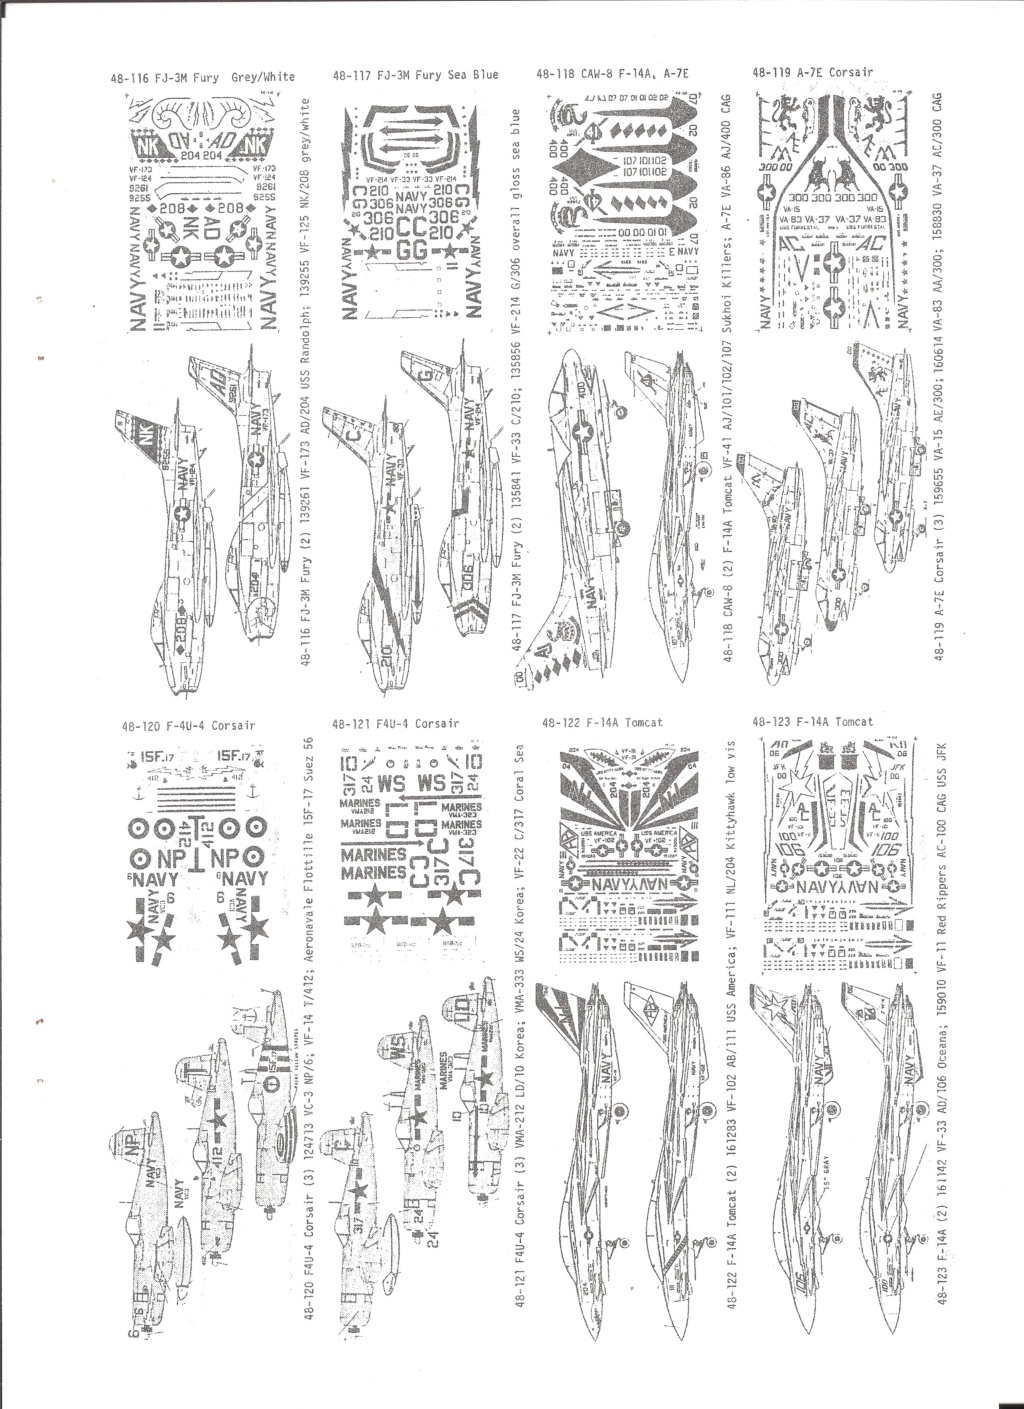 [SUPERSCALE DECALS & XTRADECAL 1993] Catalogue 1993 Super131